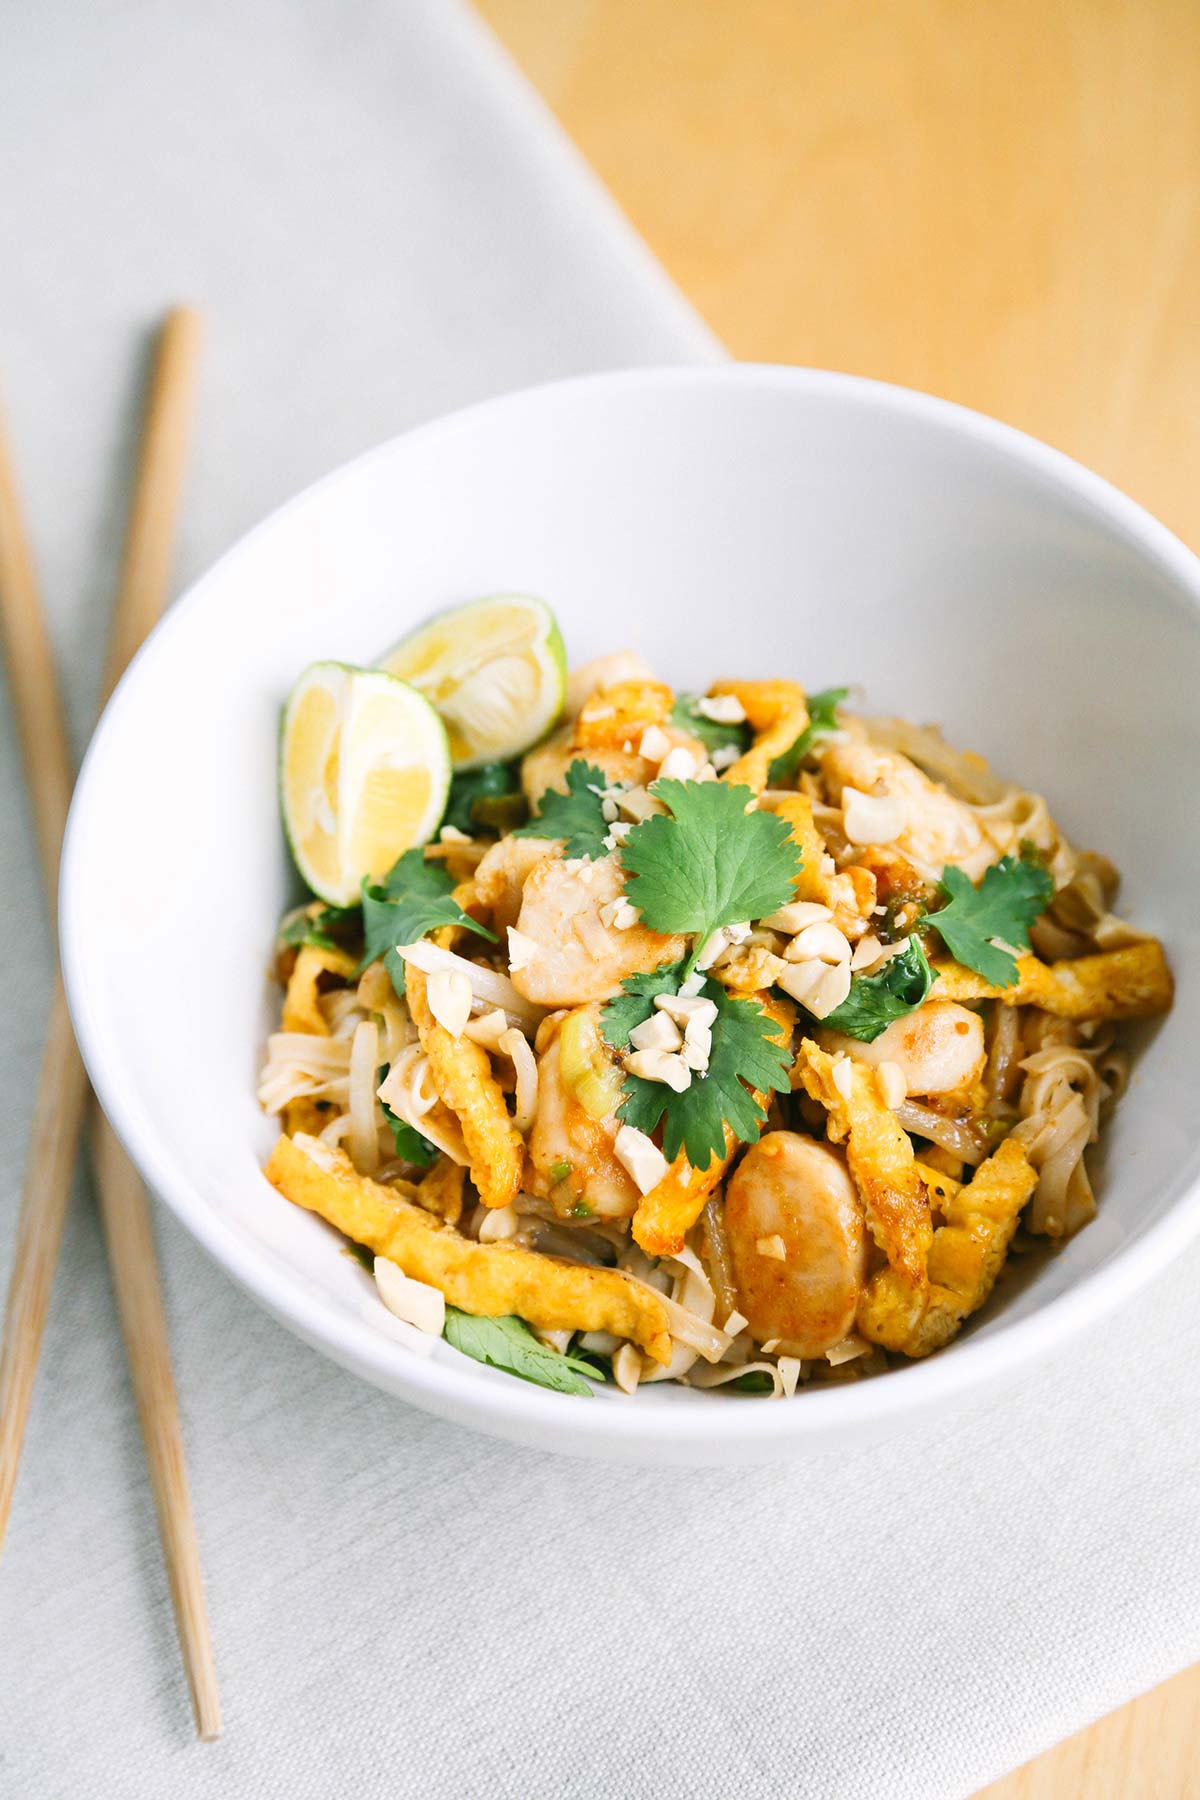 Keto pad thai recipe for low carb. Uses shirataki noodles with chicken.